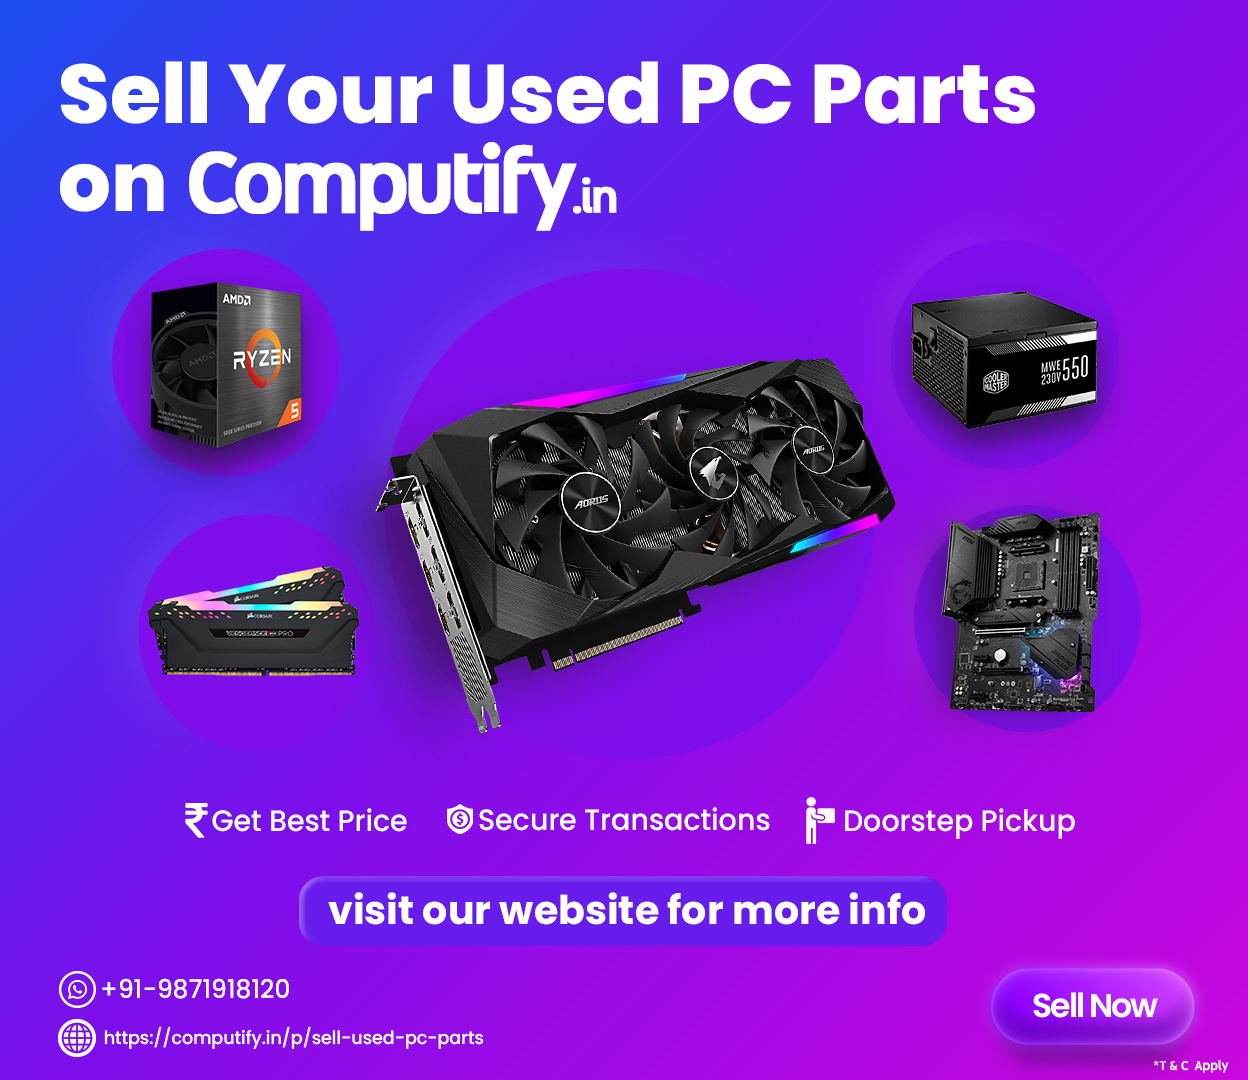 How to sell used PC parts